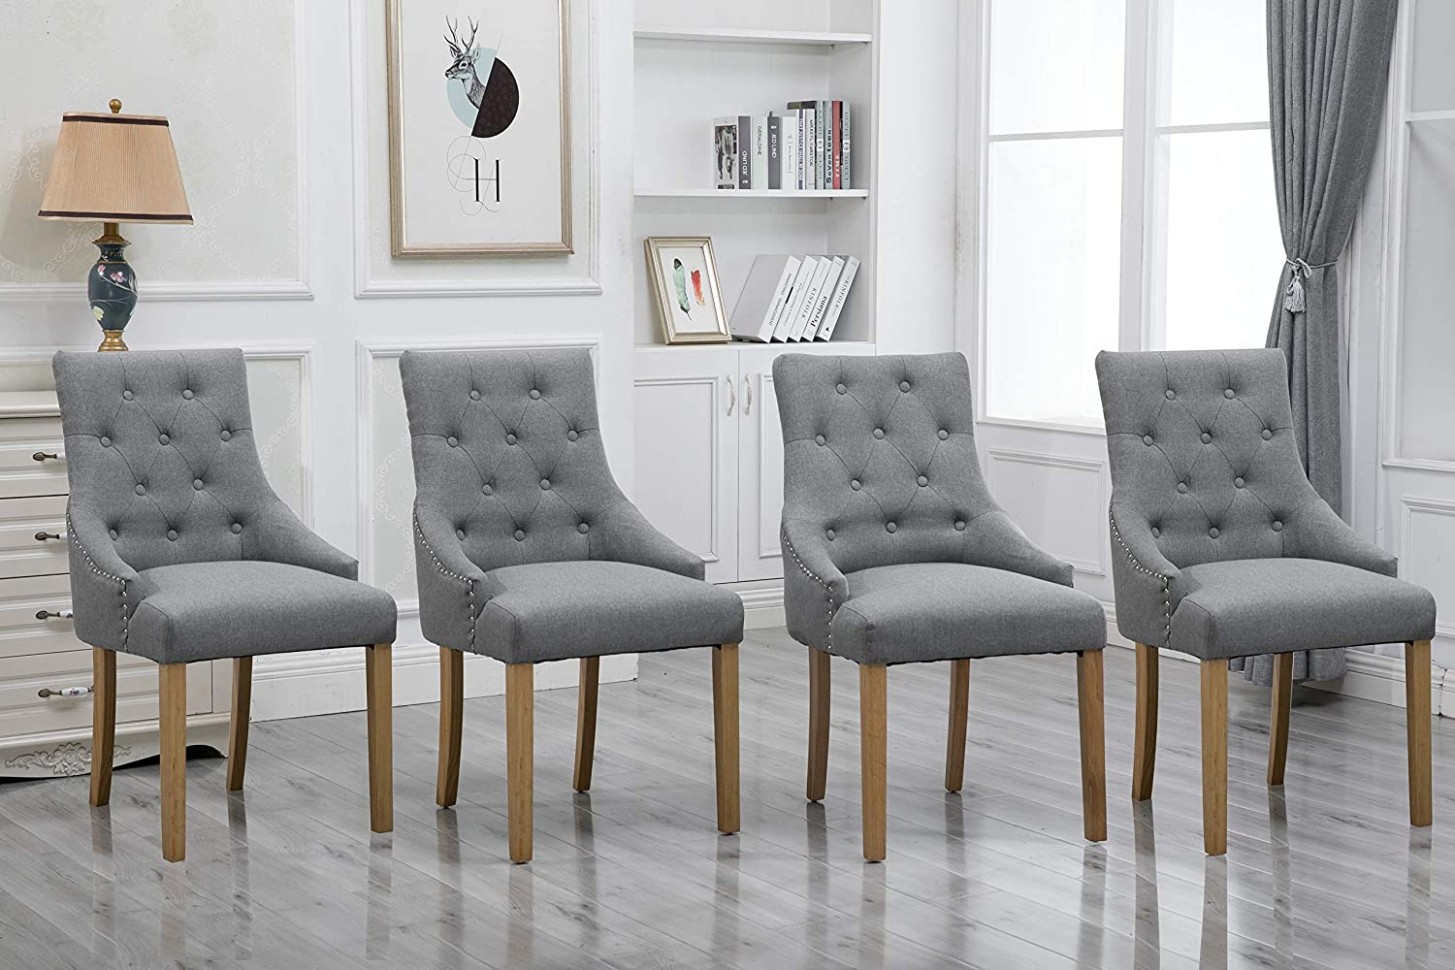 HomeSailing 3 Comfy Armchairs Dining Room Chairs with Arms Only Grey Fabric  Upholstered Kitchen Chairs High Back Button Tufted Padded Side Chairs for   - grey kitchen chairs